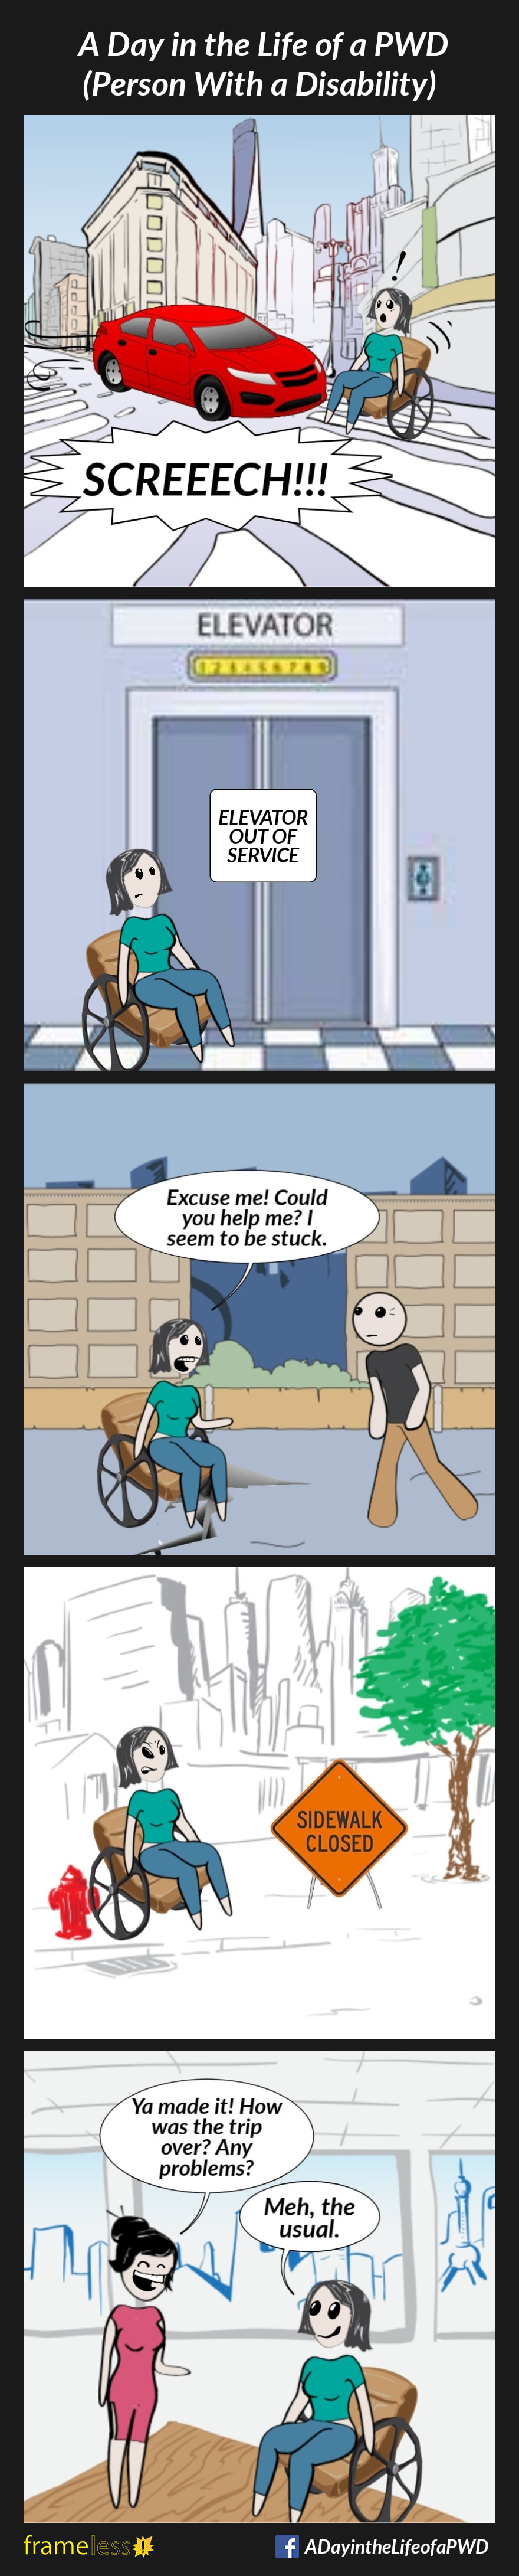 COMIC STRIP 
A Day in the Life of a PWD (Person With a Disability) 

Frame 1:
A woman in a wheelchair is in a crosswalk. A left turning car screeches to a stop, nearly hitting her.

Frame 2:
The woman is at an elevator in a train station. There is a sign on the elevator that reads 